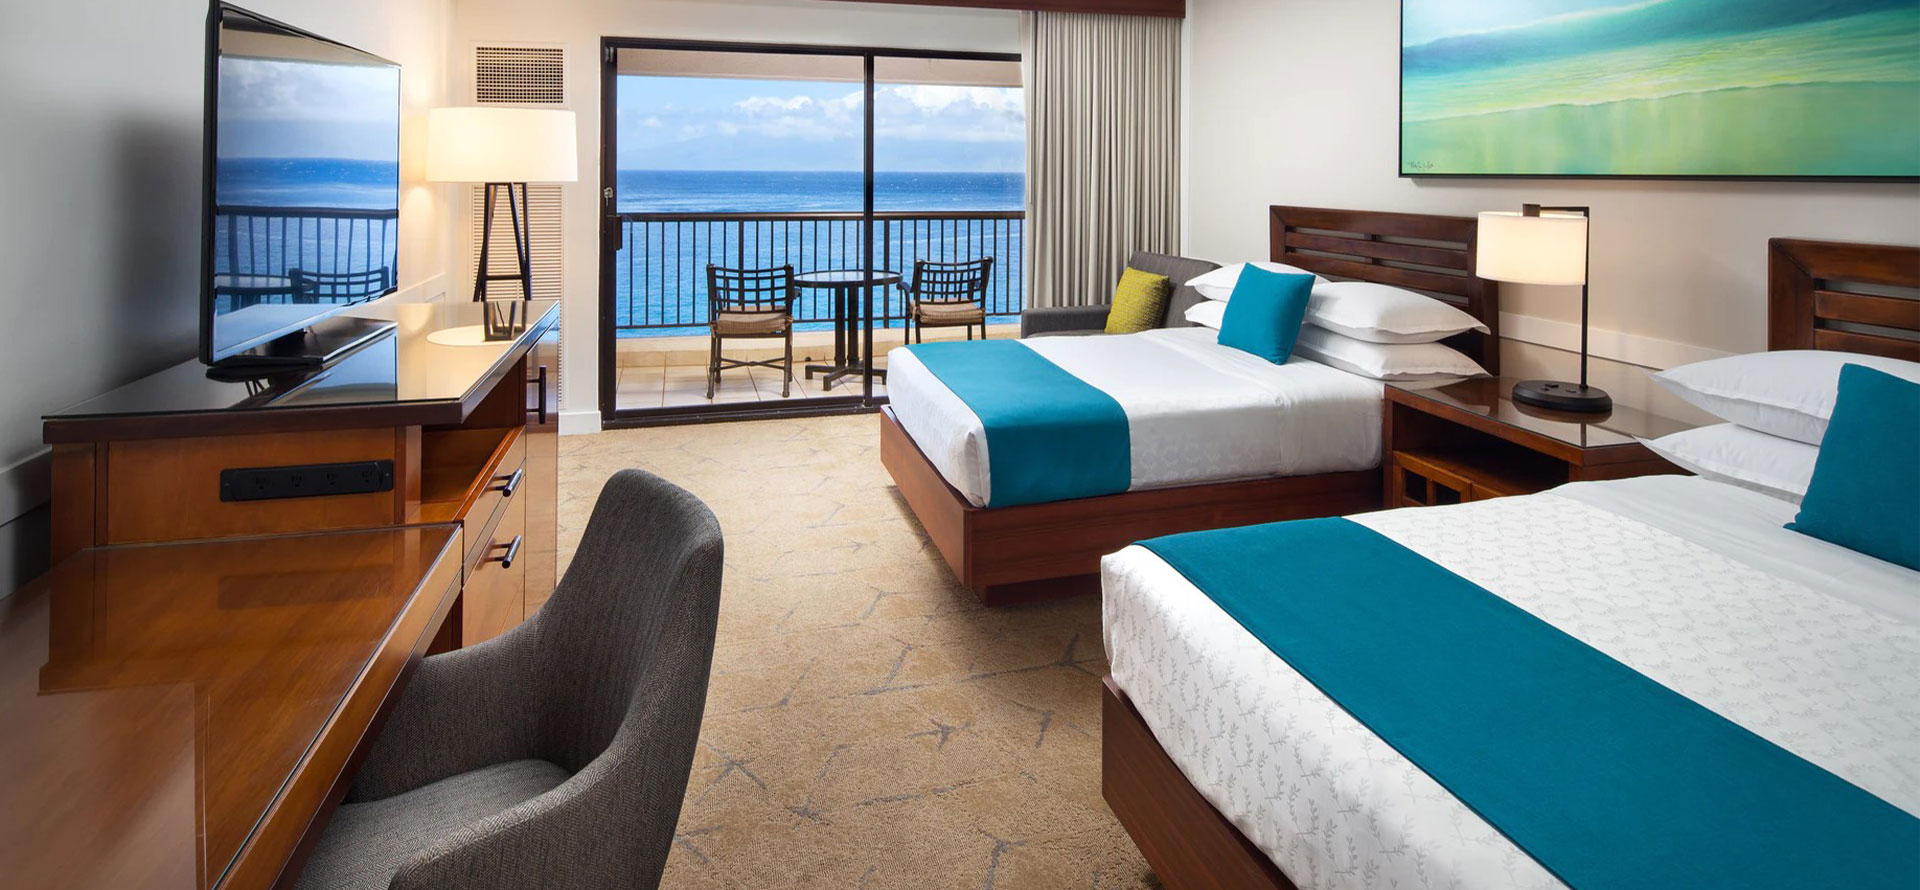 Room in Maui All-Inclusive Family Resorts.